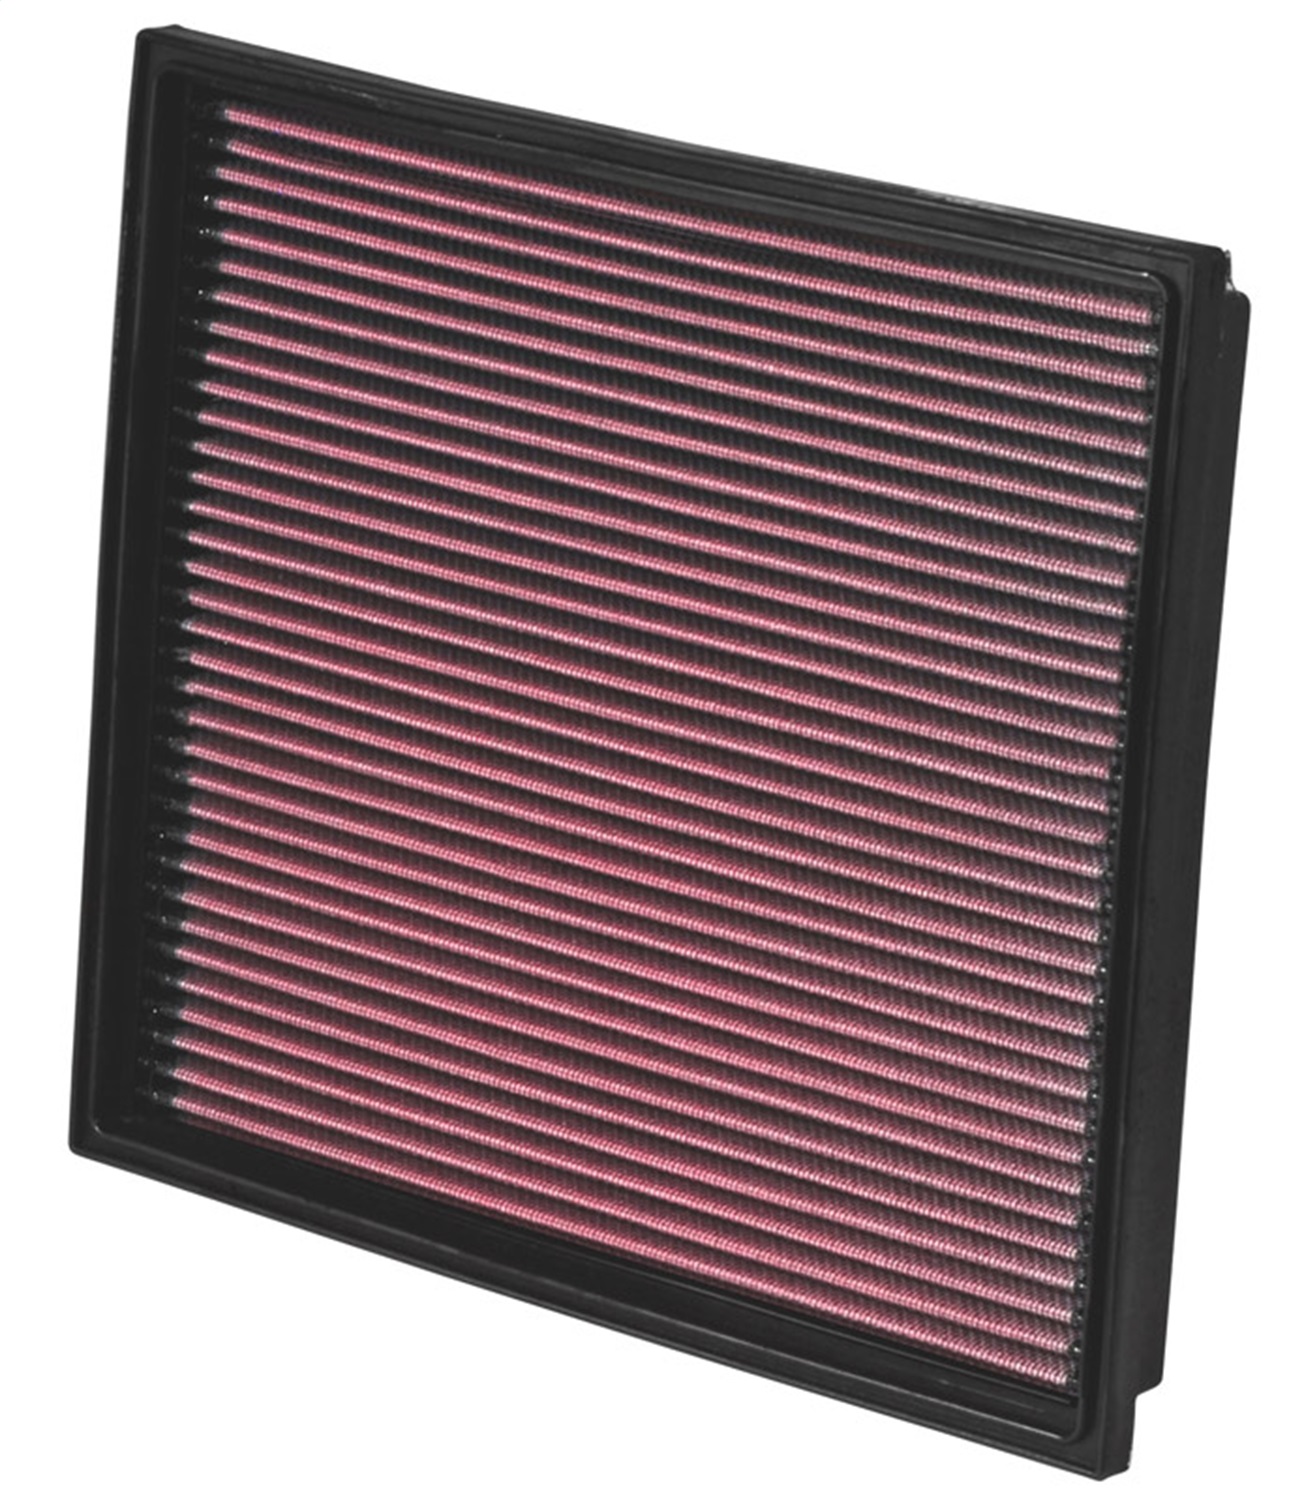 K&N Filters K&N Filters 33-2779 Air Filter Fits 97-03 A8 A8 Quattro S8